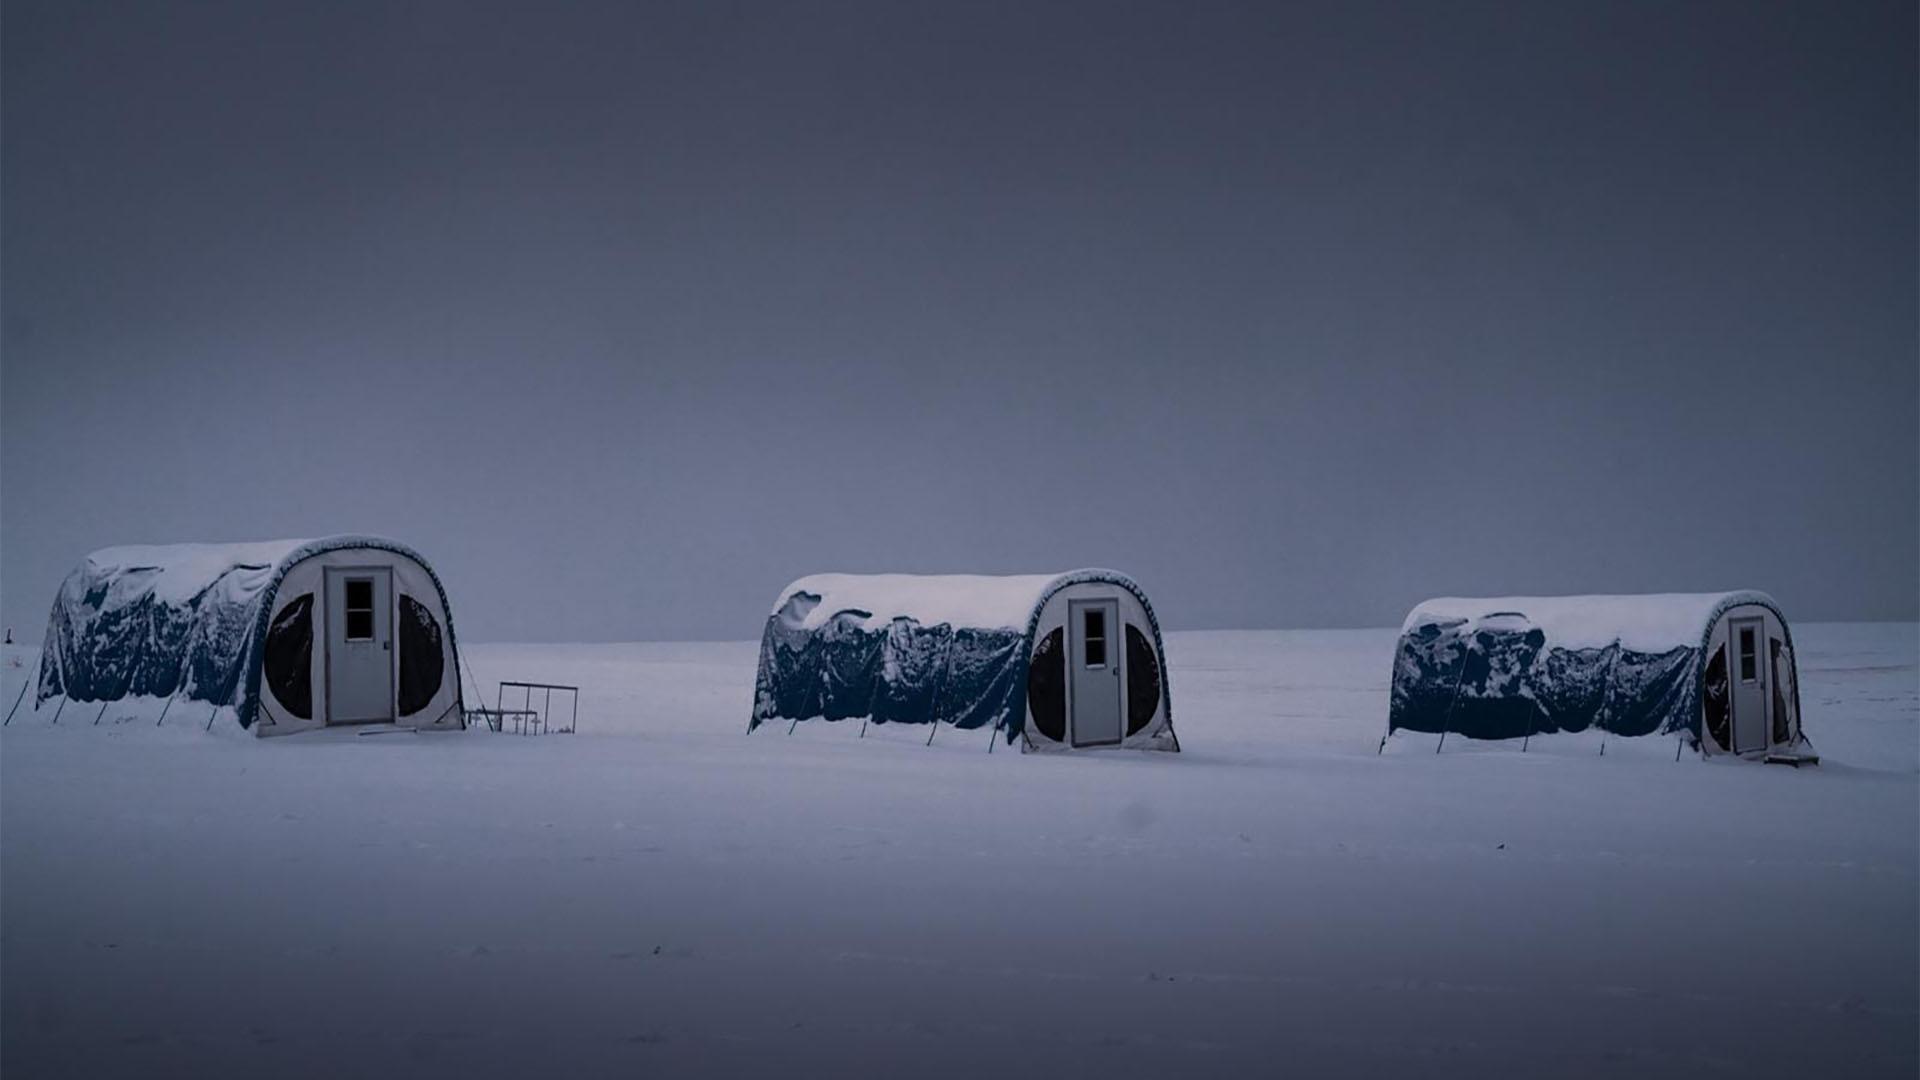 A photograph of snow-covered tents in Greenland.